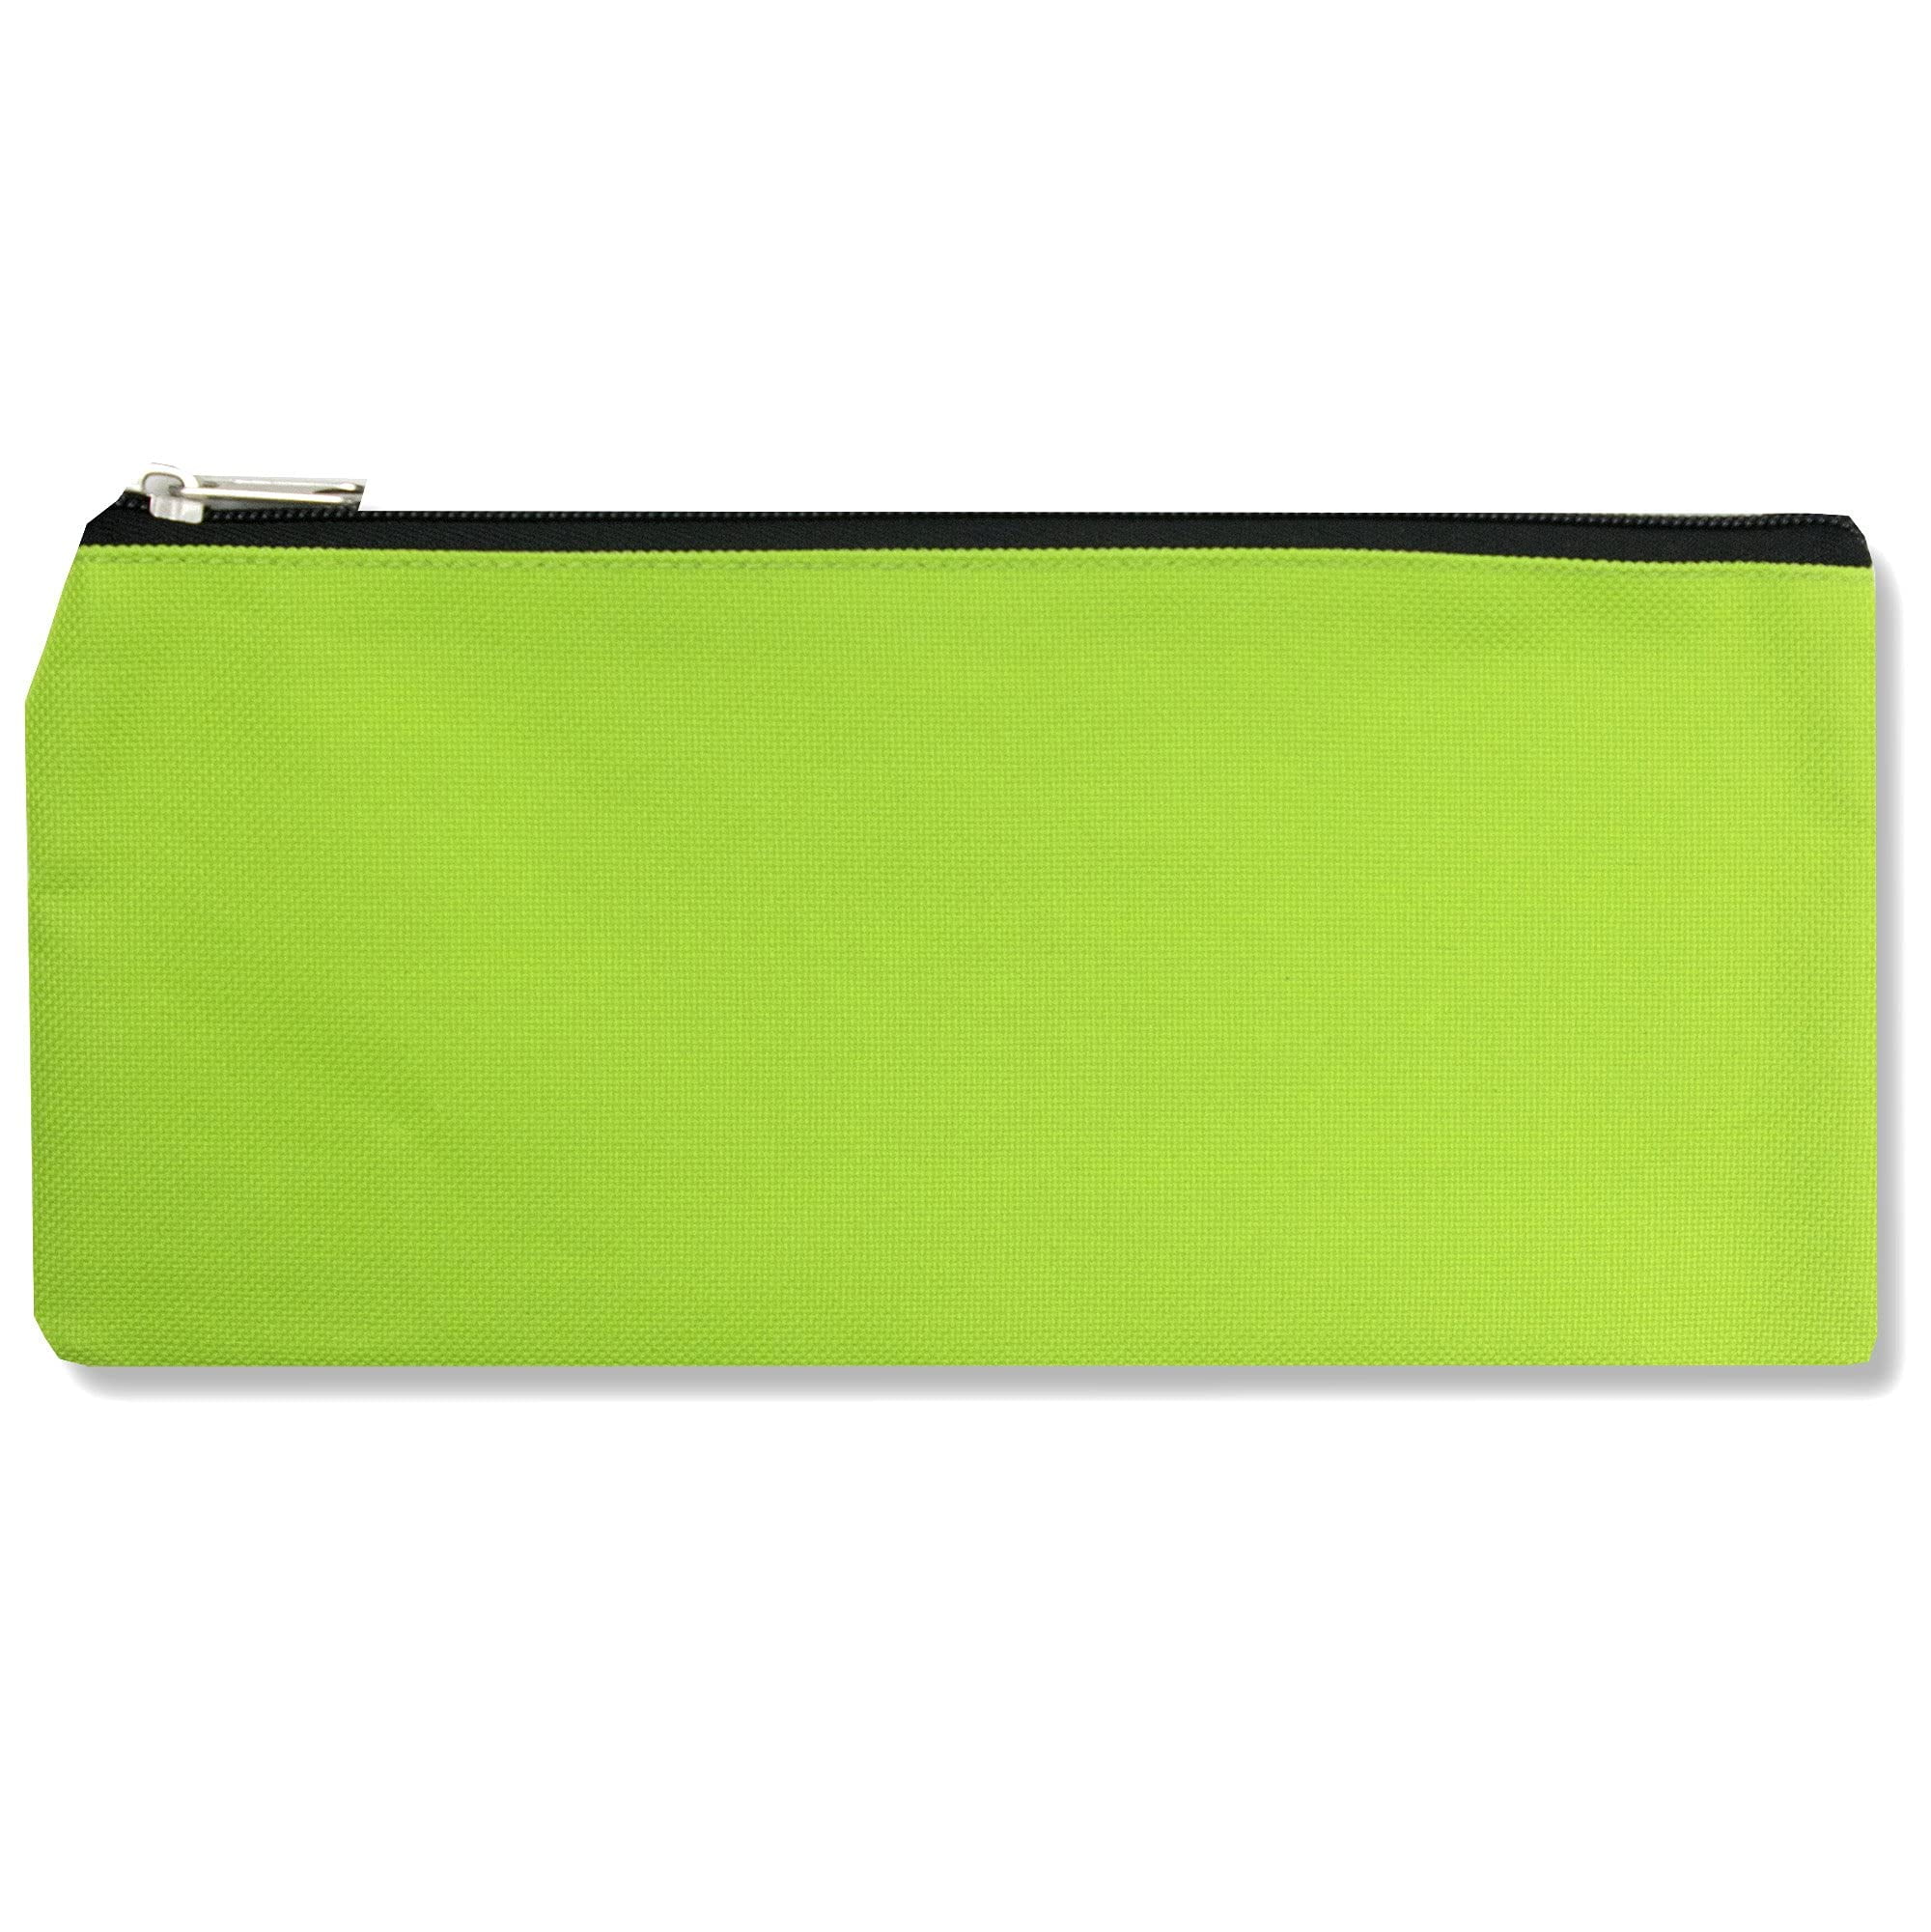 Classic Traditional Cloth Pencil Cases in Bulk, in Solid Colors